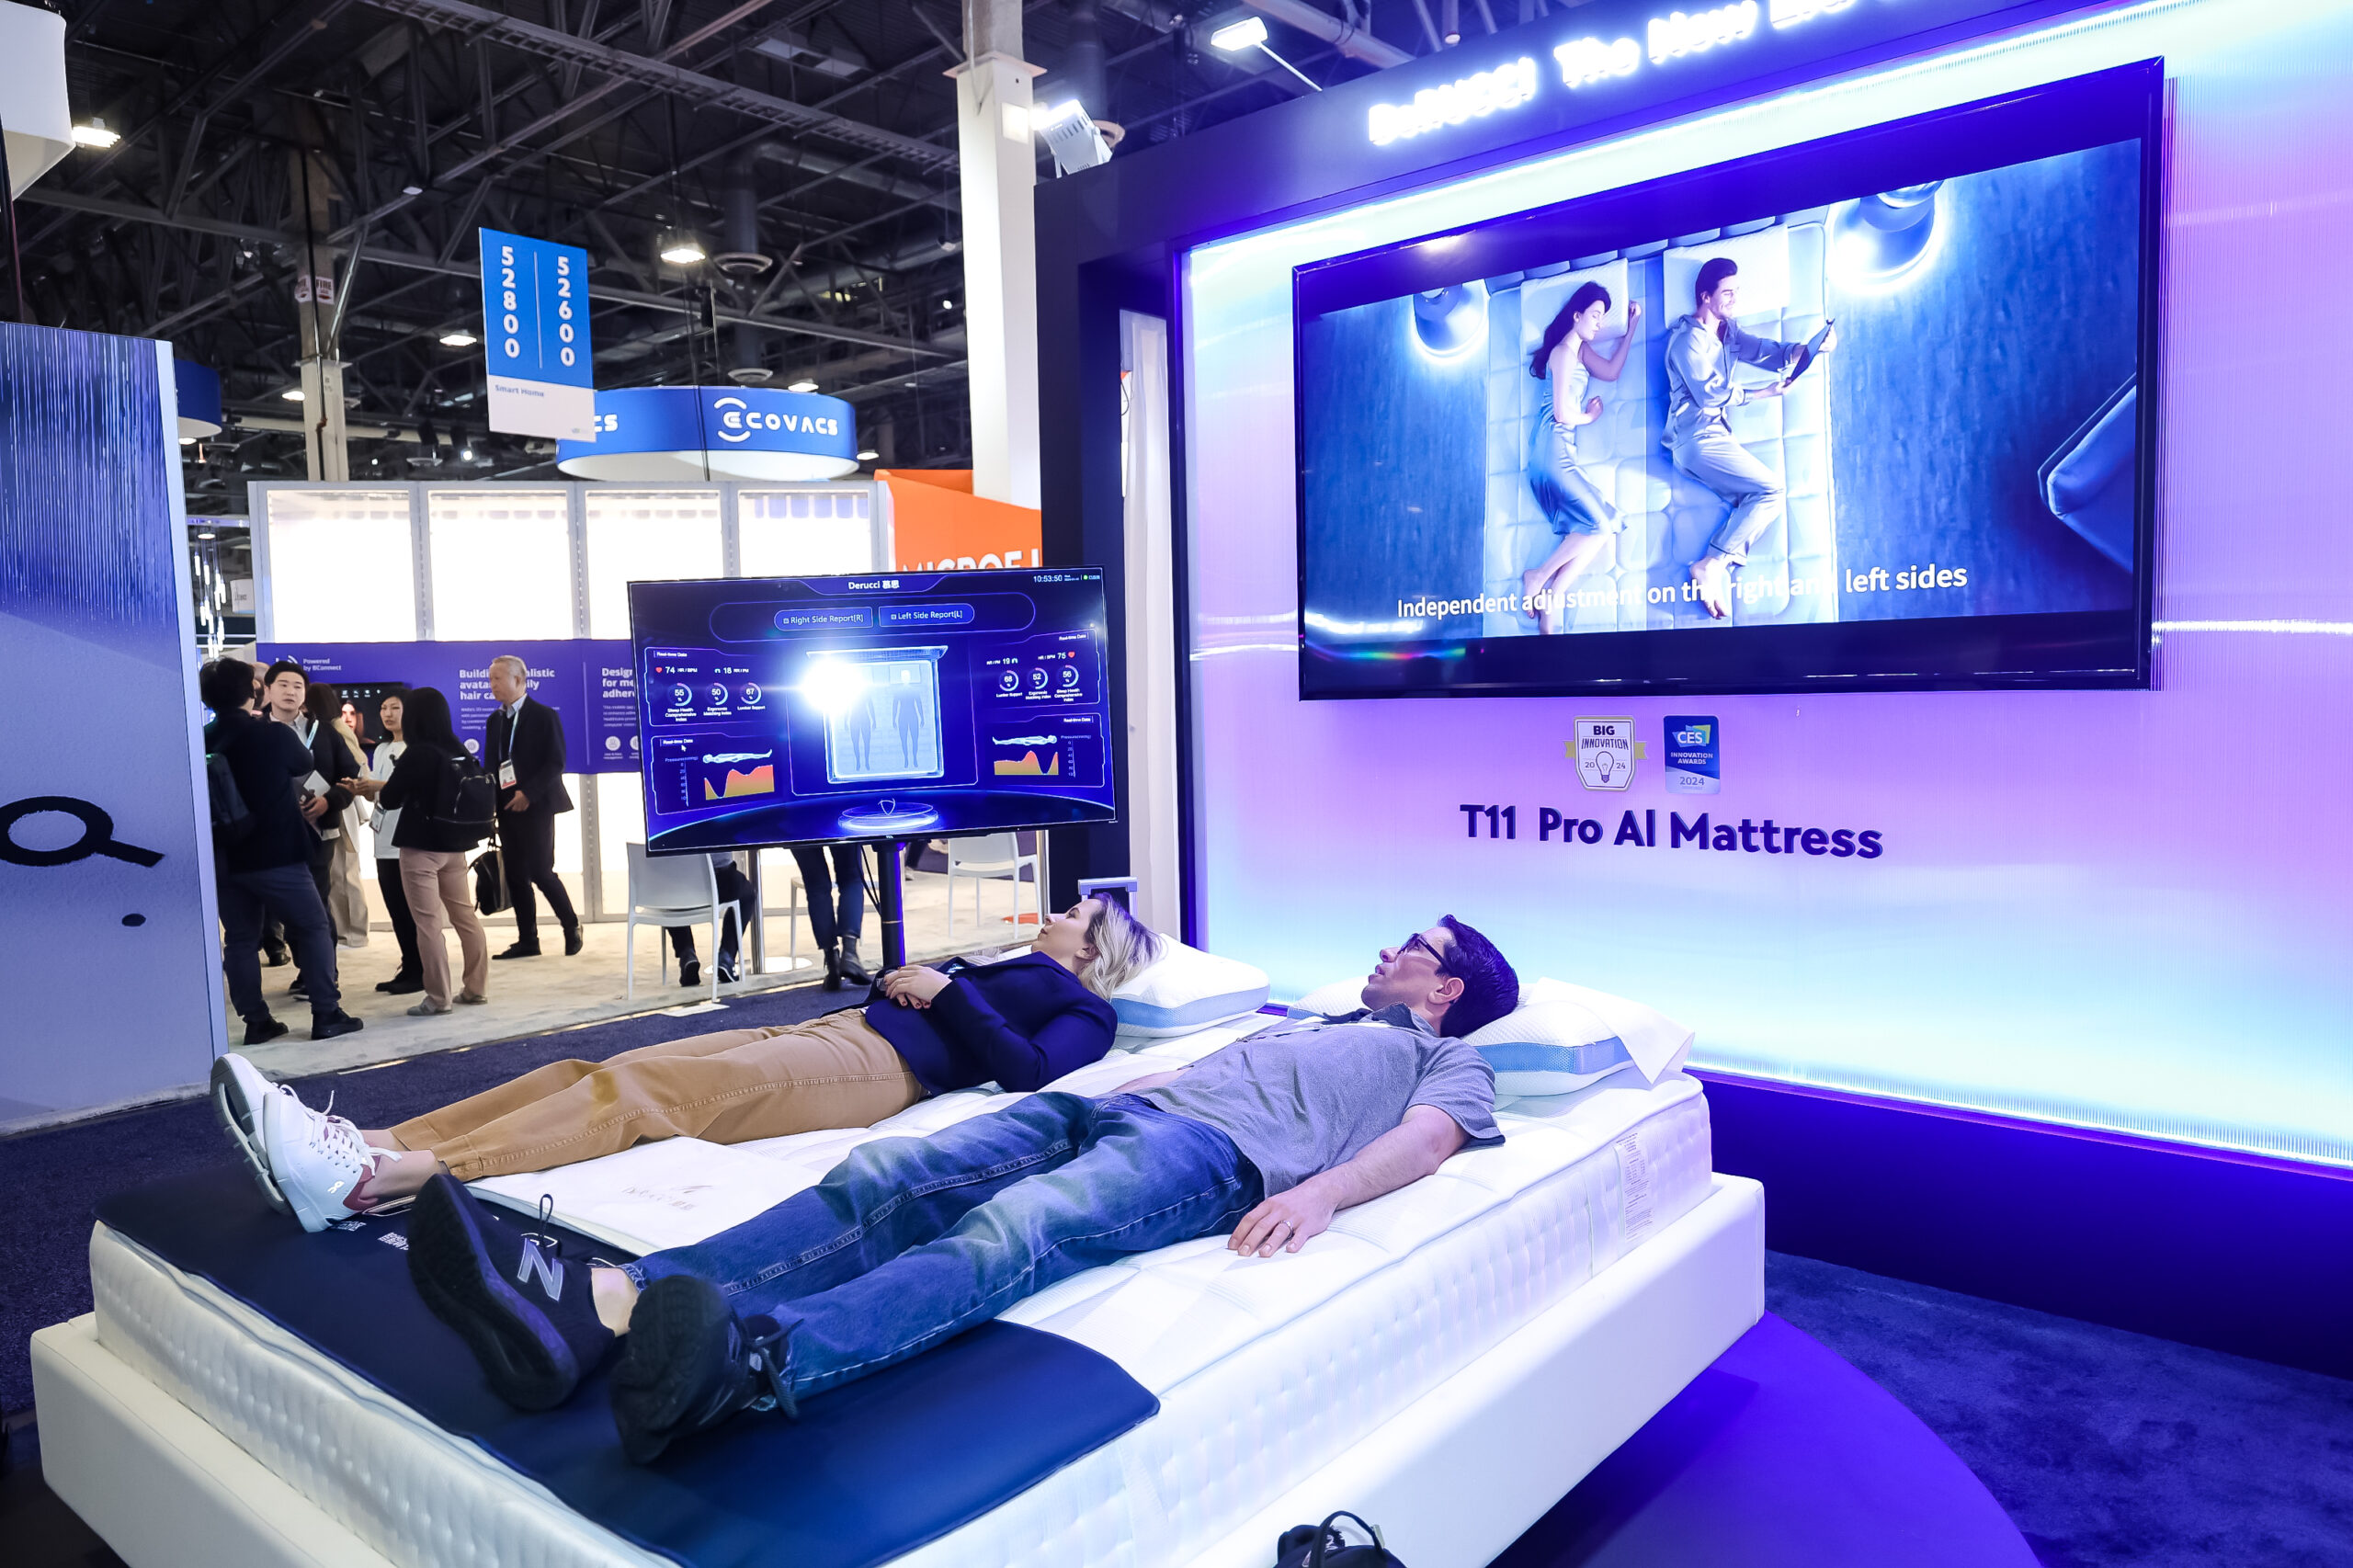 The U.S. Sleep Market Booms with DeRUCCI’s Revolutionary AI T11 Pro Smart Mattress at CES 2024